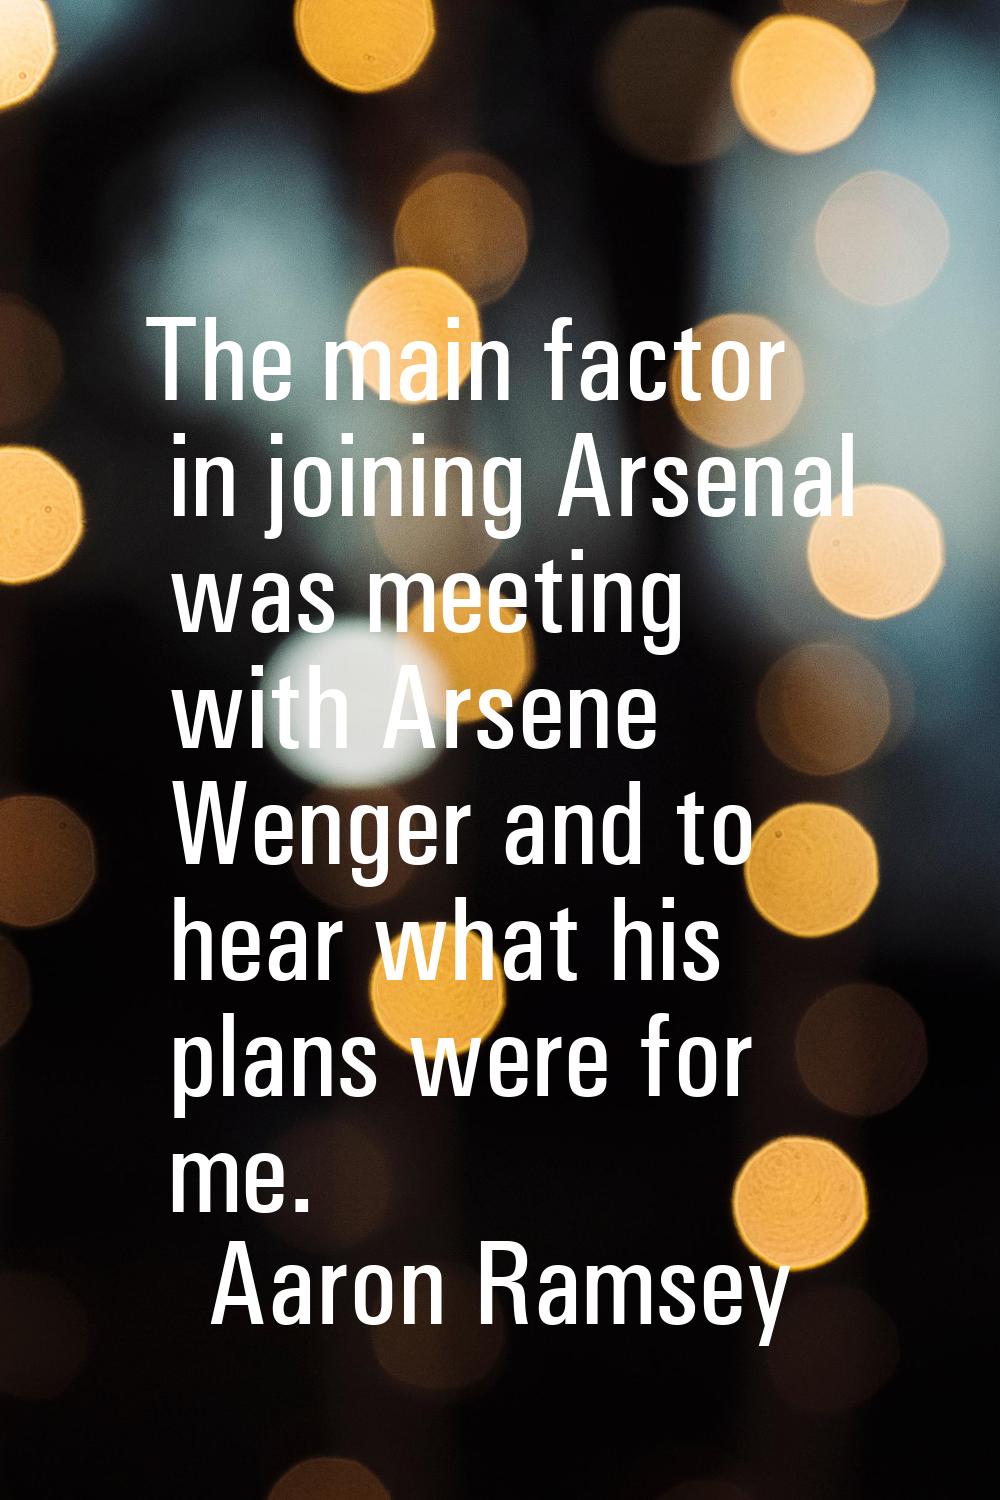 The main factor in joining Arsenal was meeting with Arsene Wenger and to hear what his plans were f